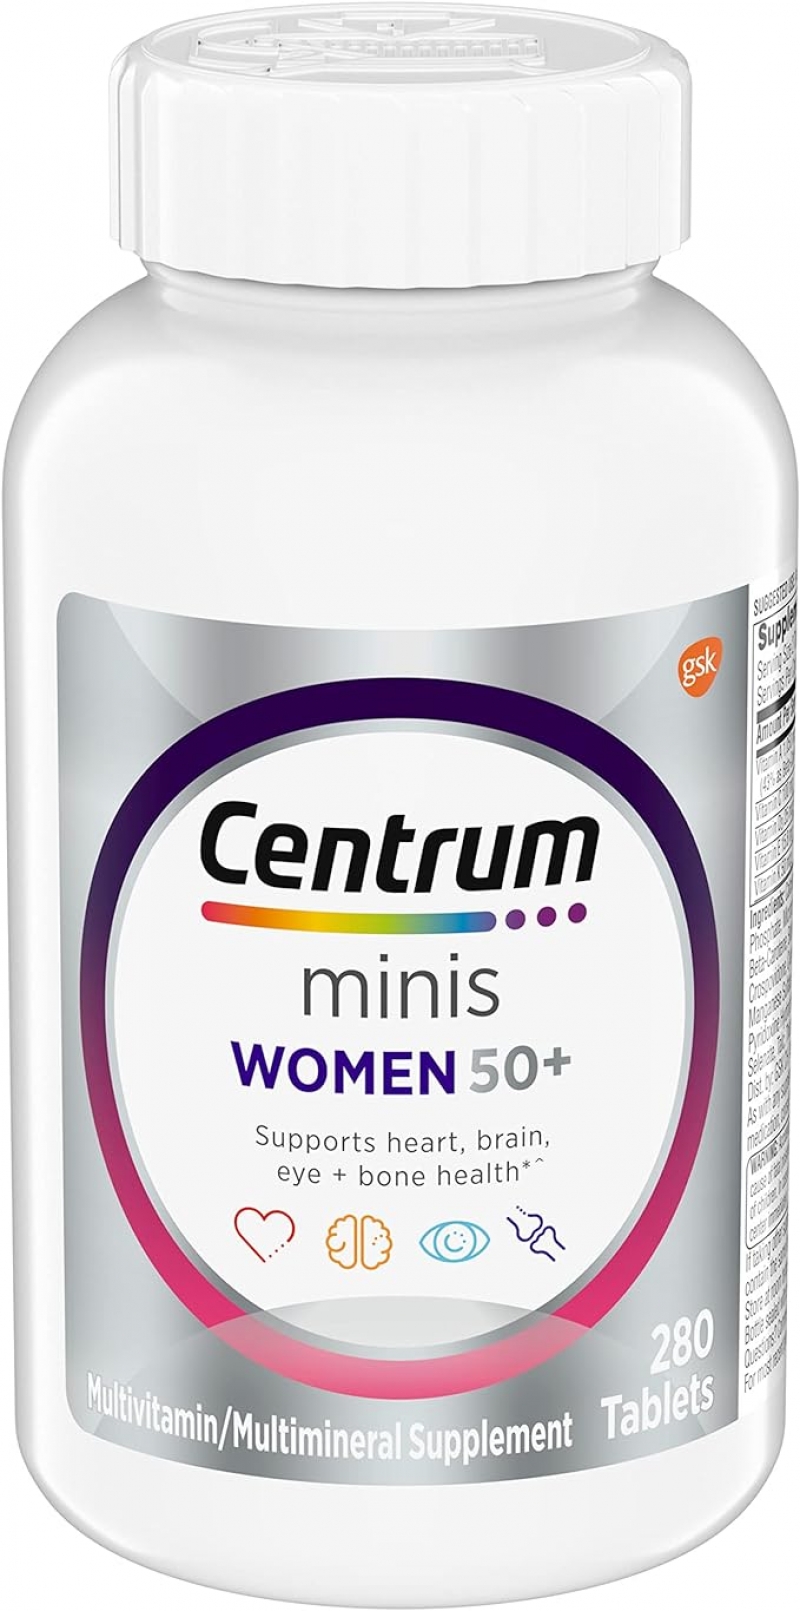 ihocon: 善存 Centrum Minis Silver Women's Multivitamin for Women 50 Plus, Multimineral Supplement with Vitamin D3, B Vitamins, Non-GMO Ingredients, Supports Memory and Cognition in Older Adults銀髮族女性綜合維他命(小粒),280粒